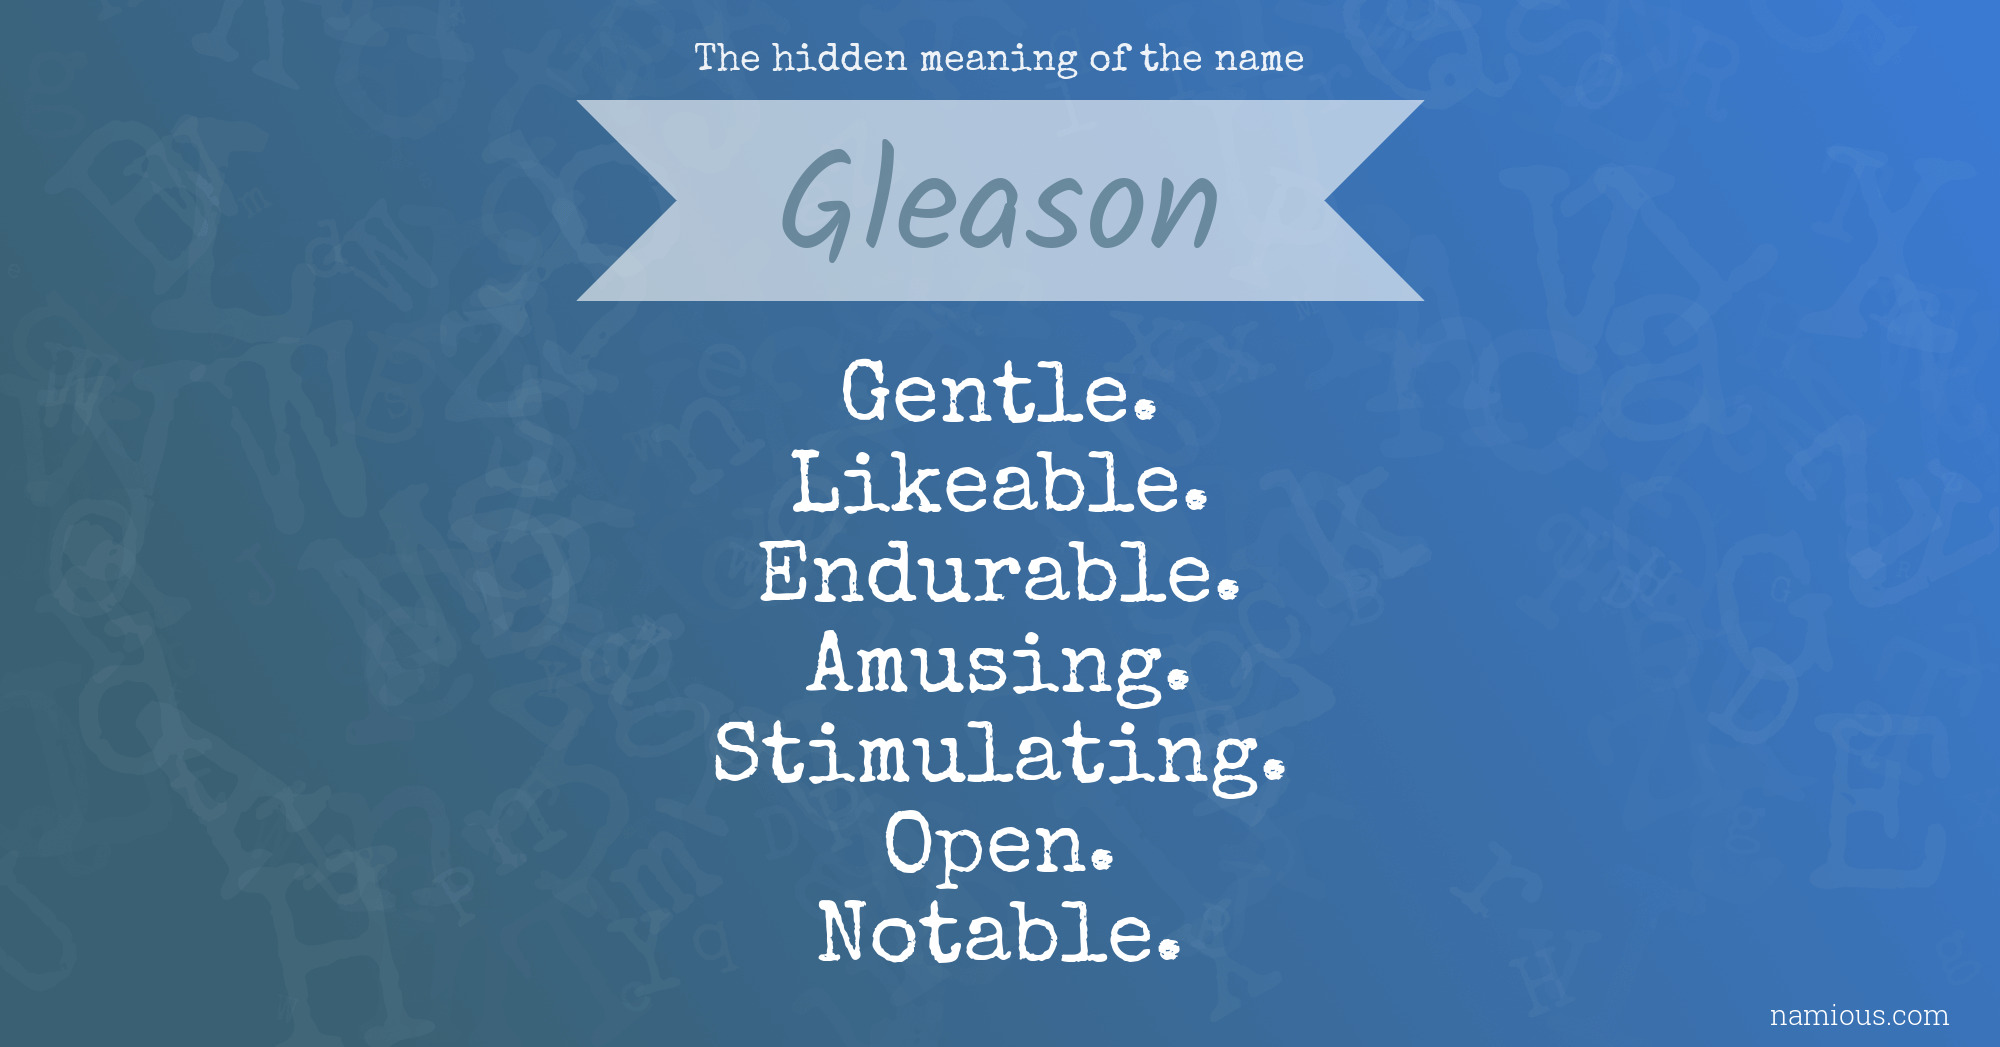 The hidden meaning of the name Gleason